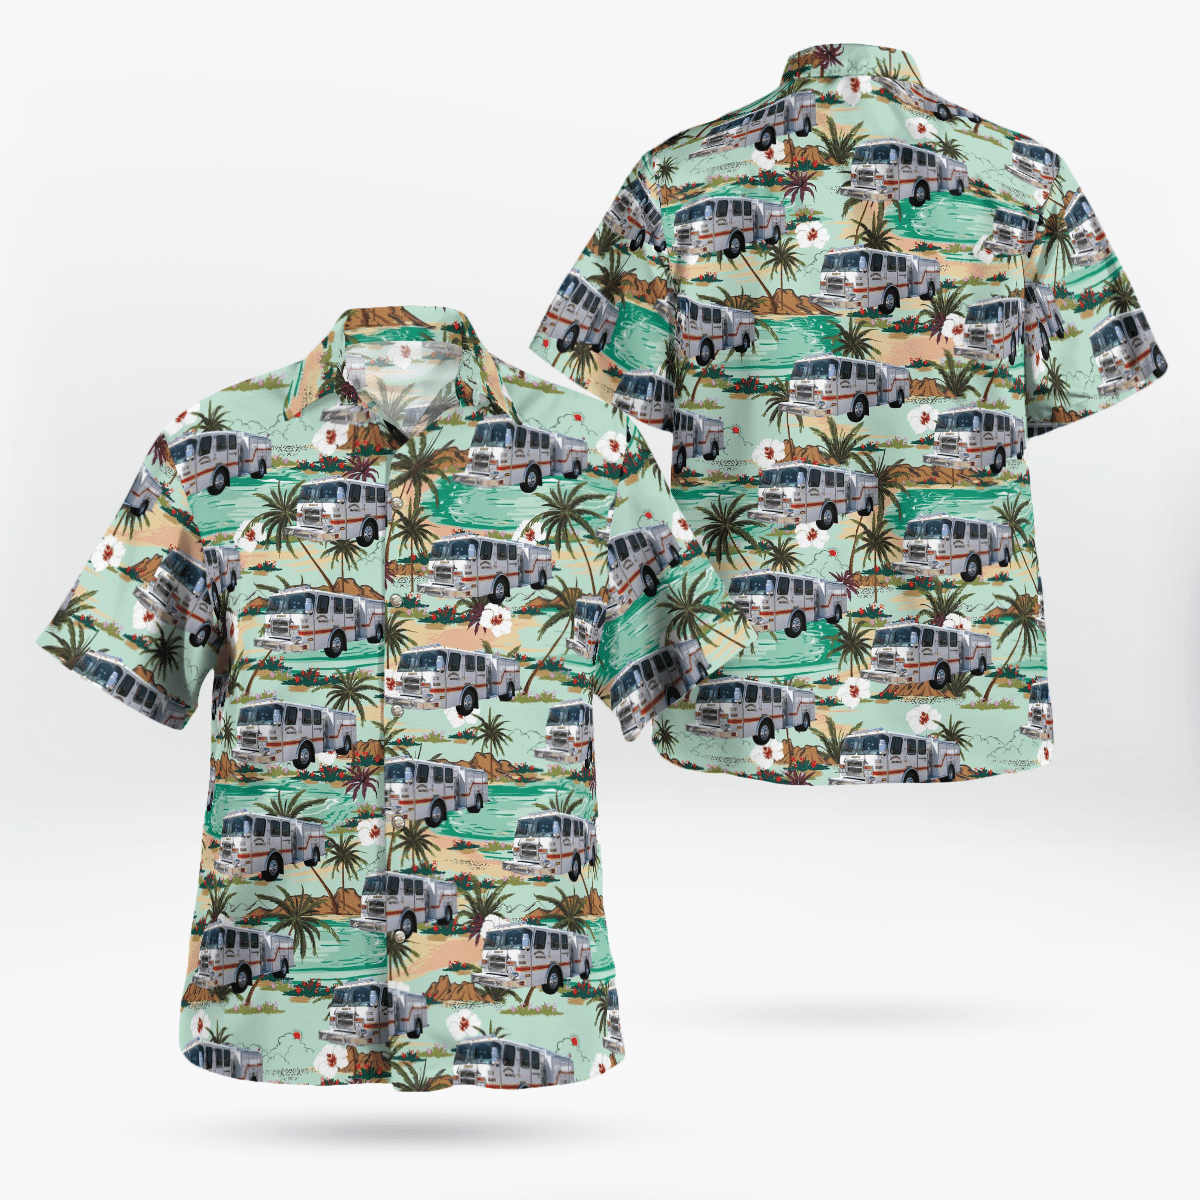 Shop now to find the perfect Hawaii Shirt for your hobby 17